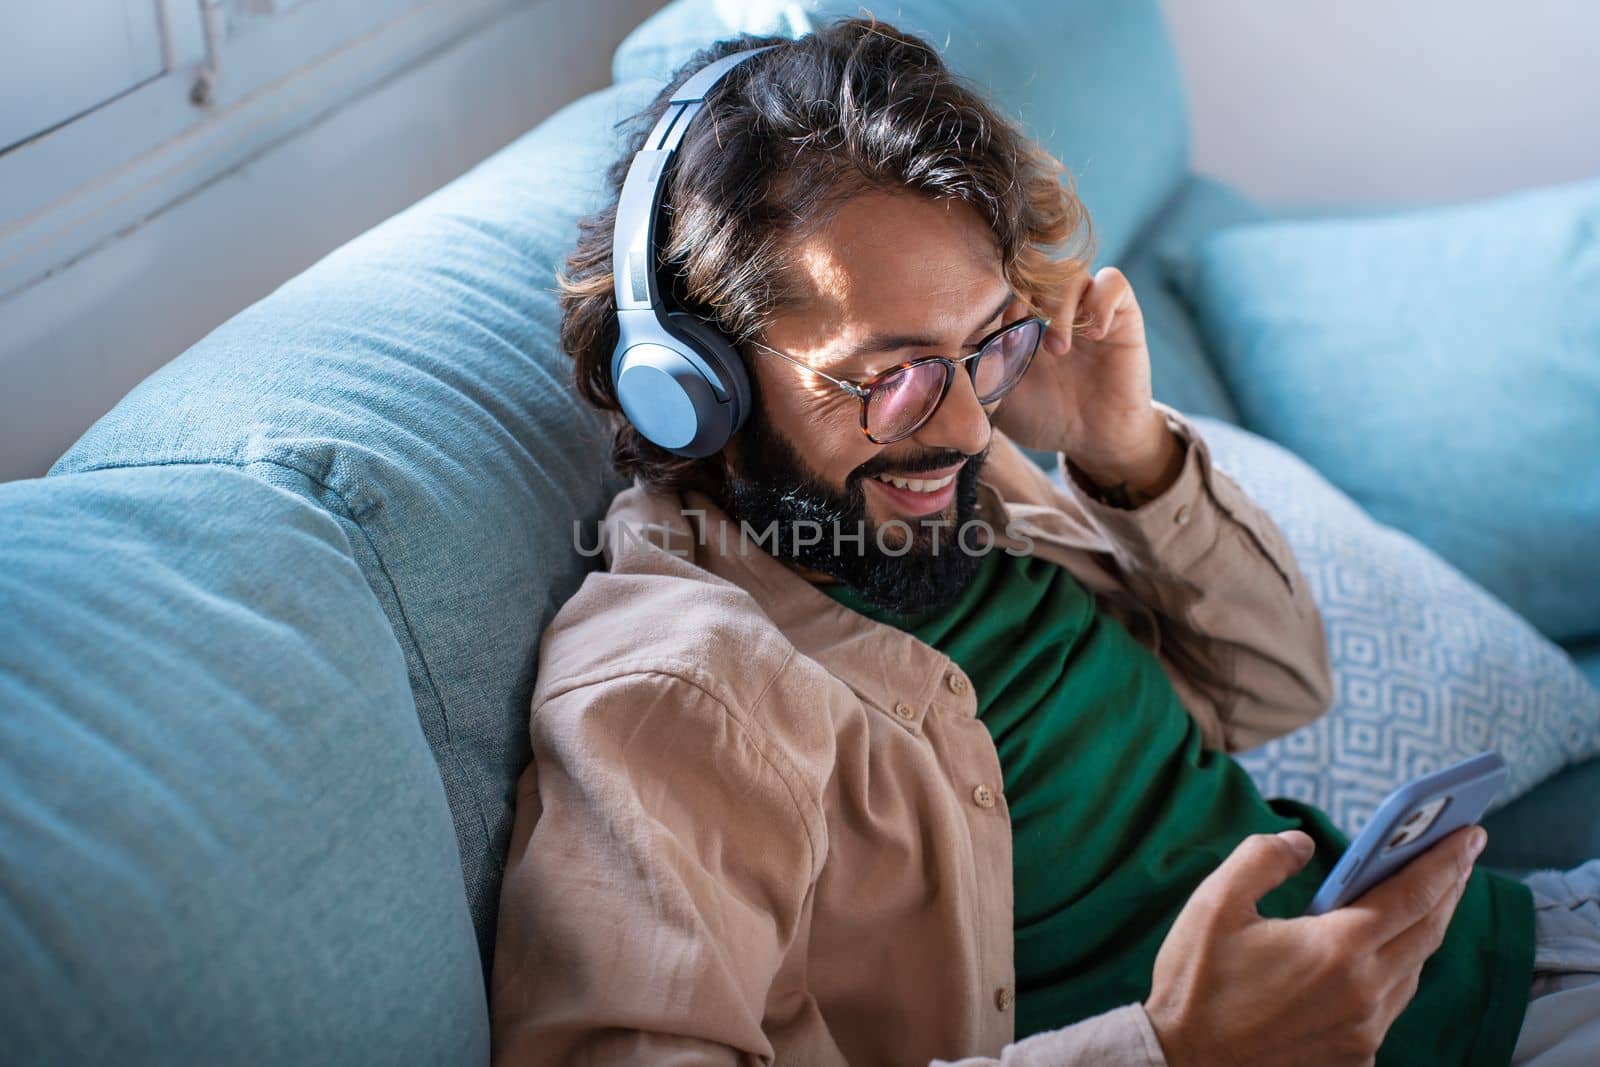 Smiling young man wearing headphones listen music playing in smartphone sitting on sofa at home by PaulCarr